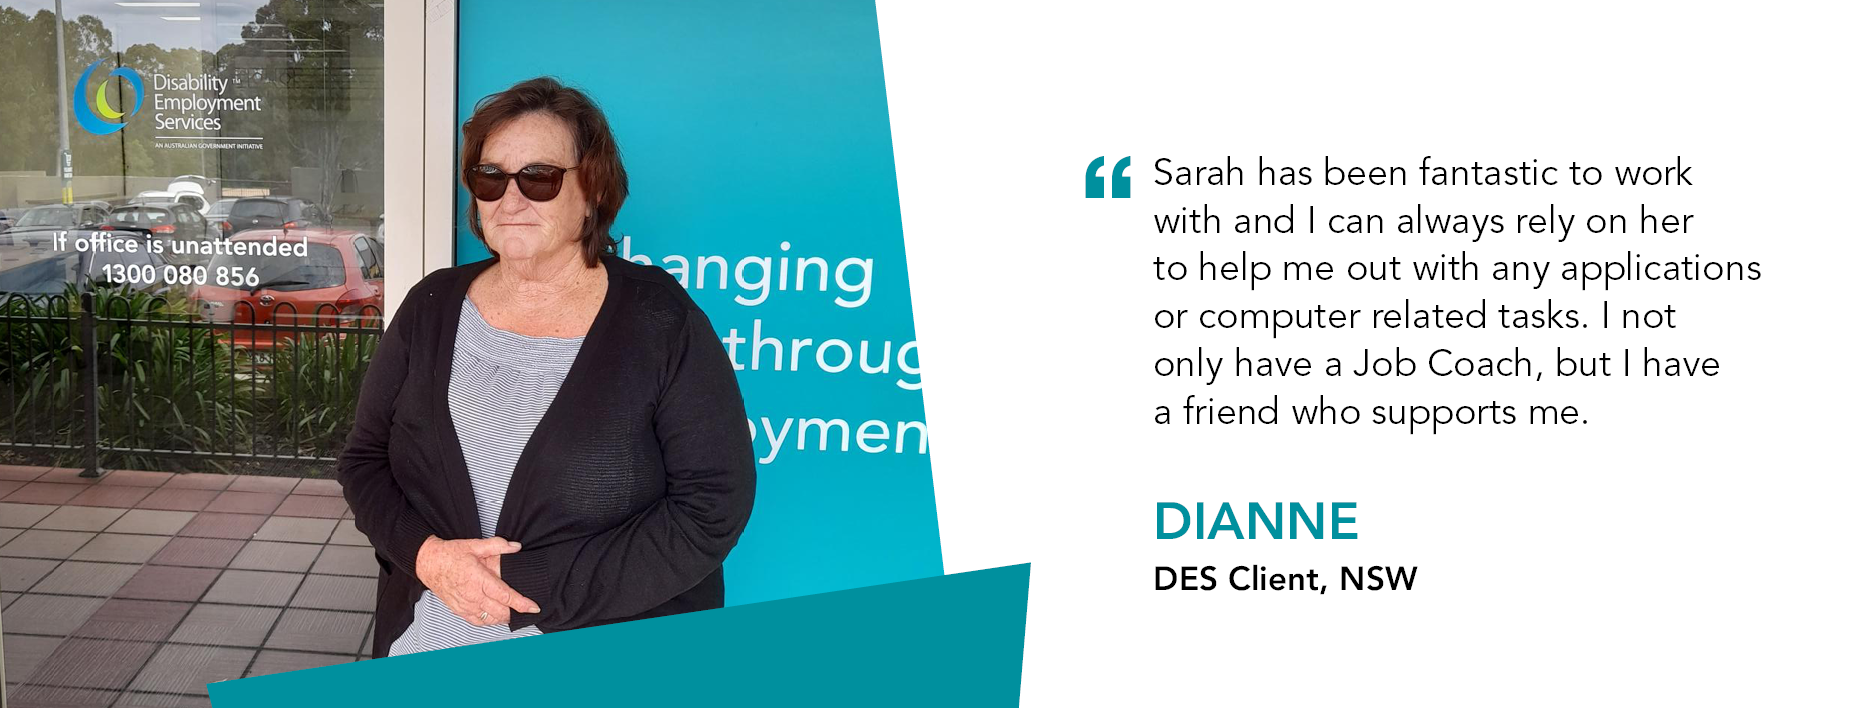 Quote reads "Sarah has been fantastic to work with, I can always rely on her to help me out with any applications or computer related tasks." said Dianne, DES client, New South Wales